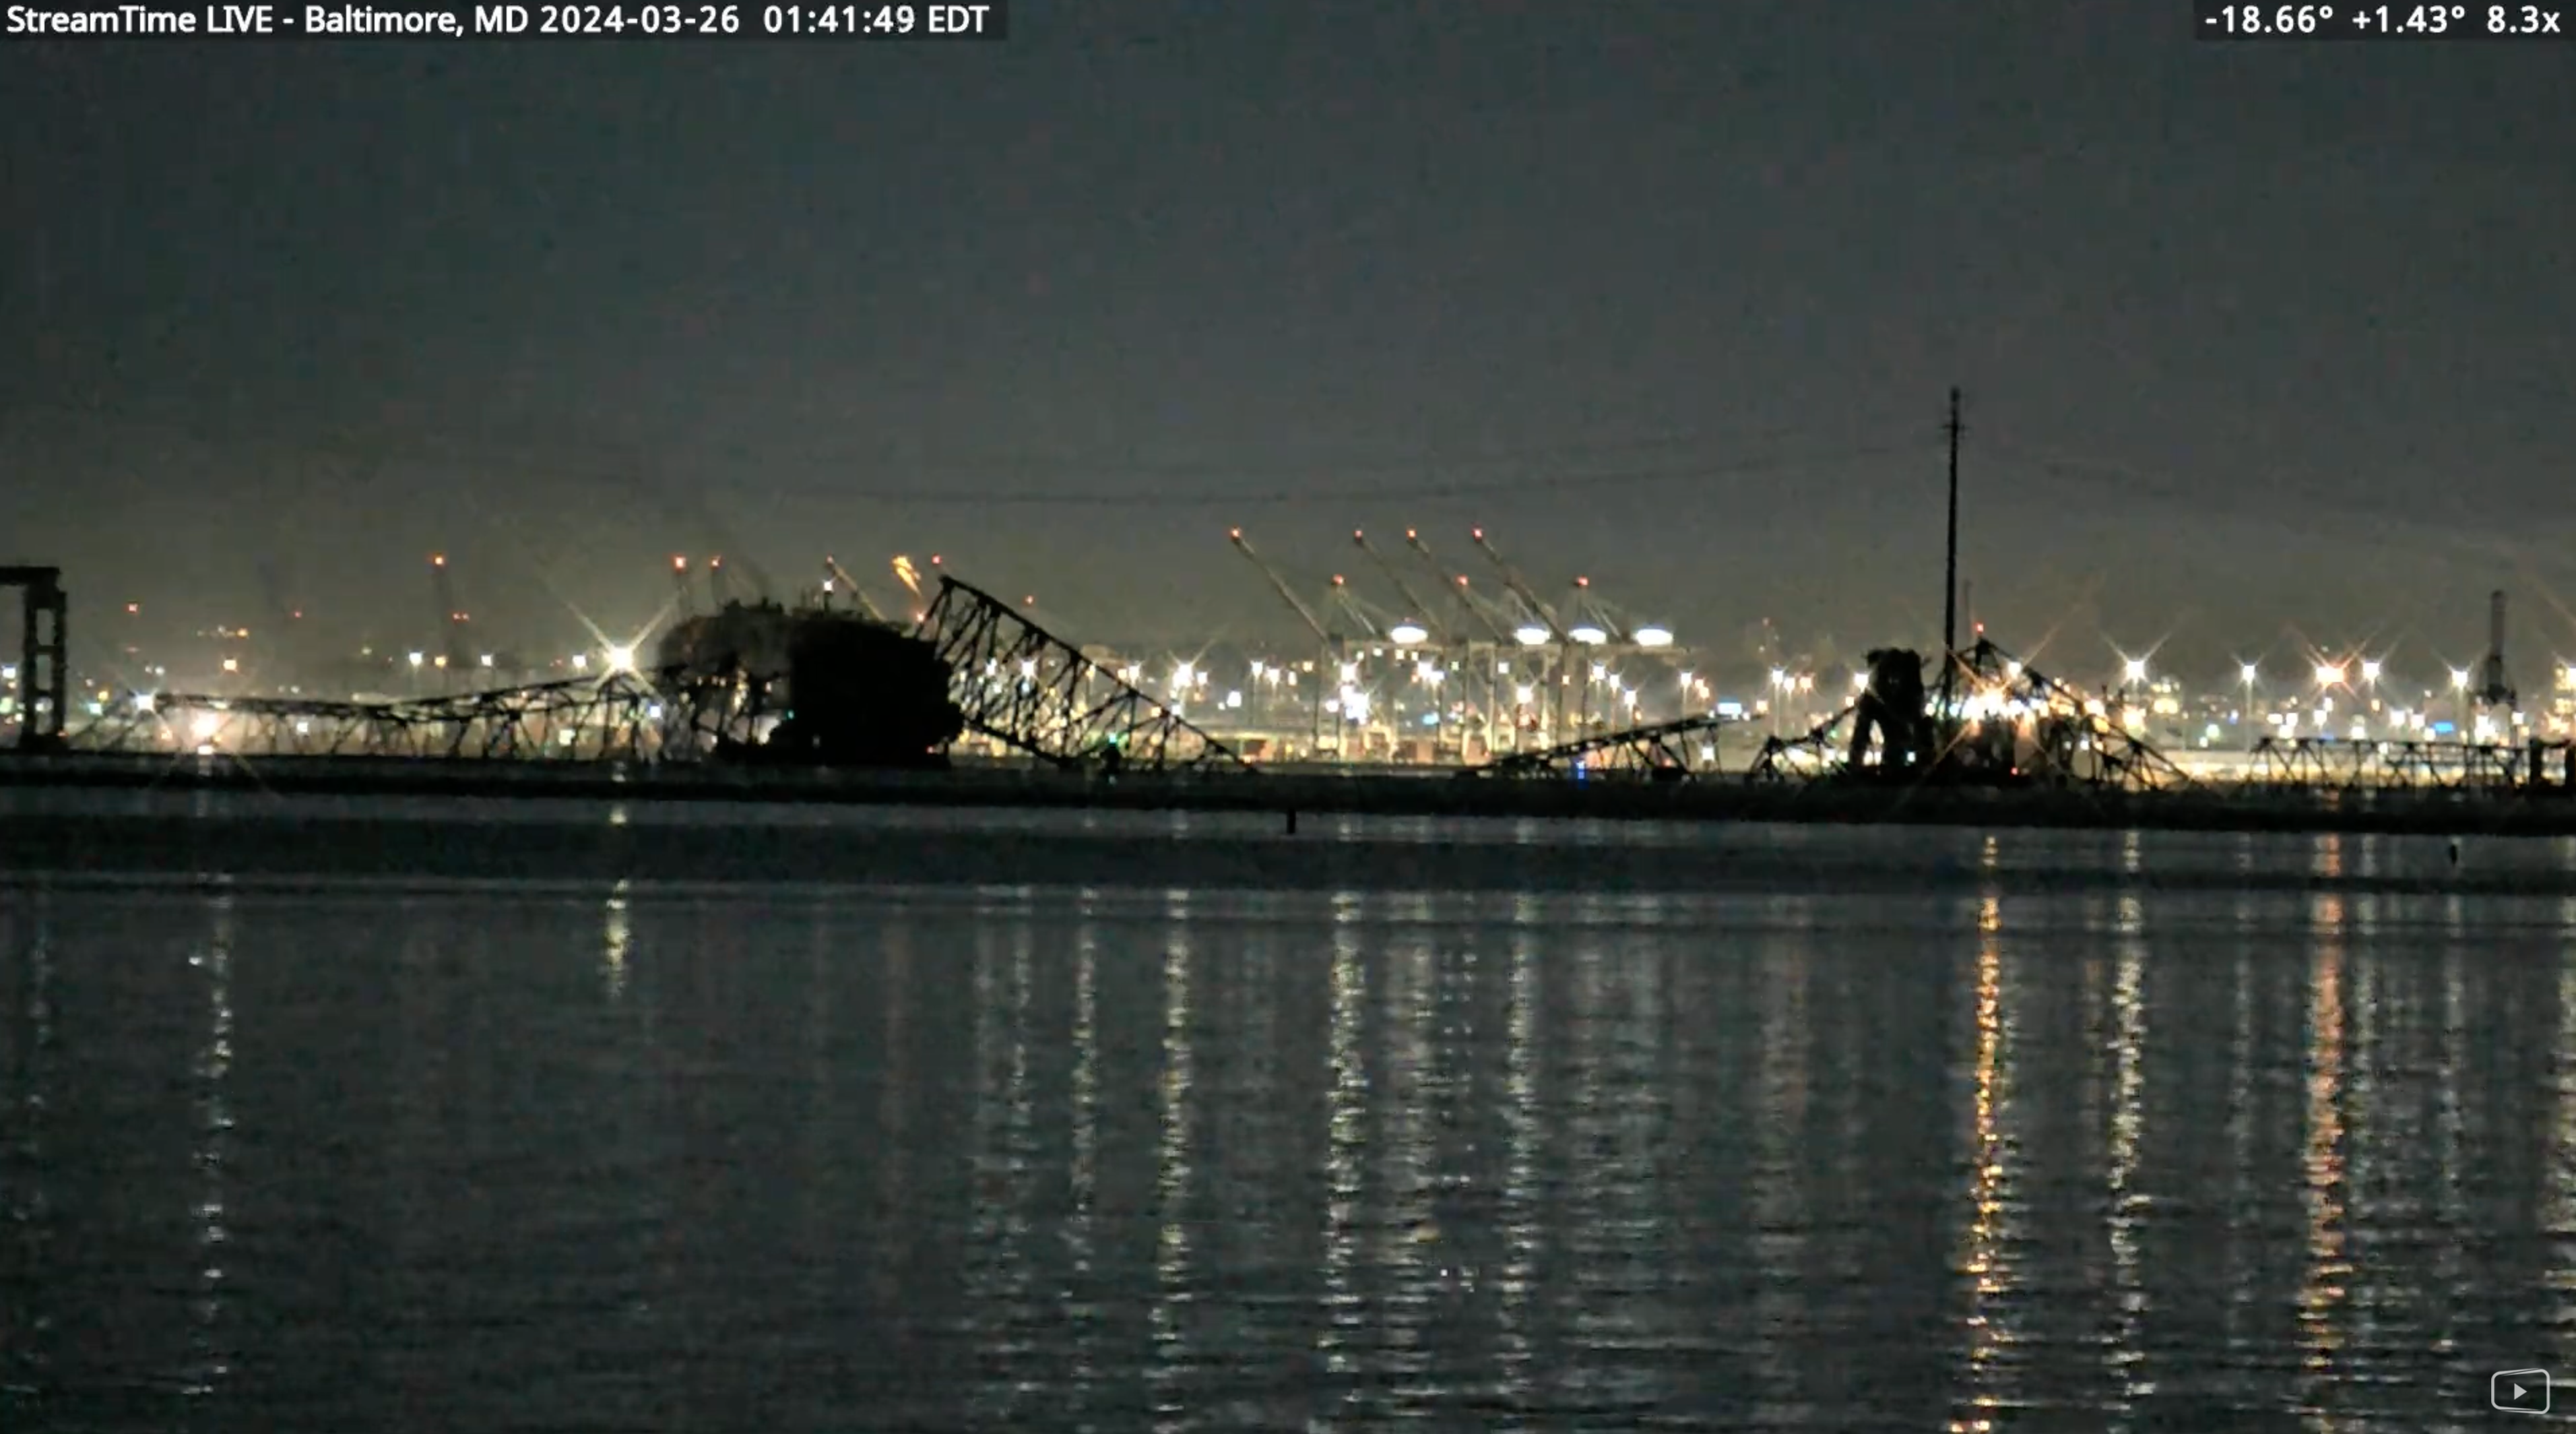 Baltimore’s Francis Scott Key Bridge, minutes after it collapsed, as seen here in a screenshot from a StreamTime Live livestream video.